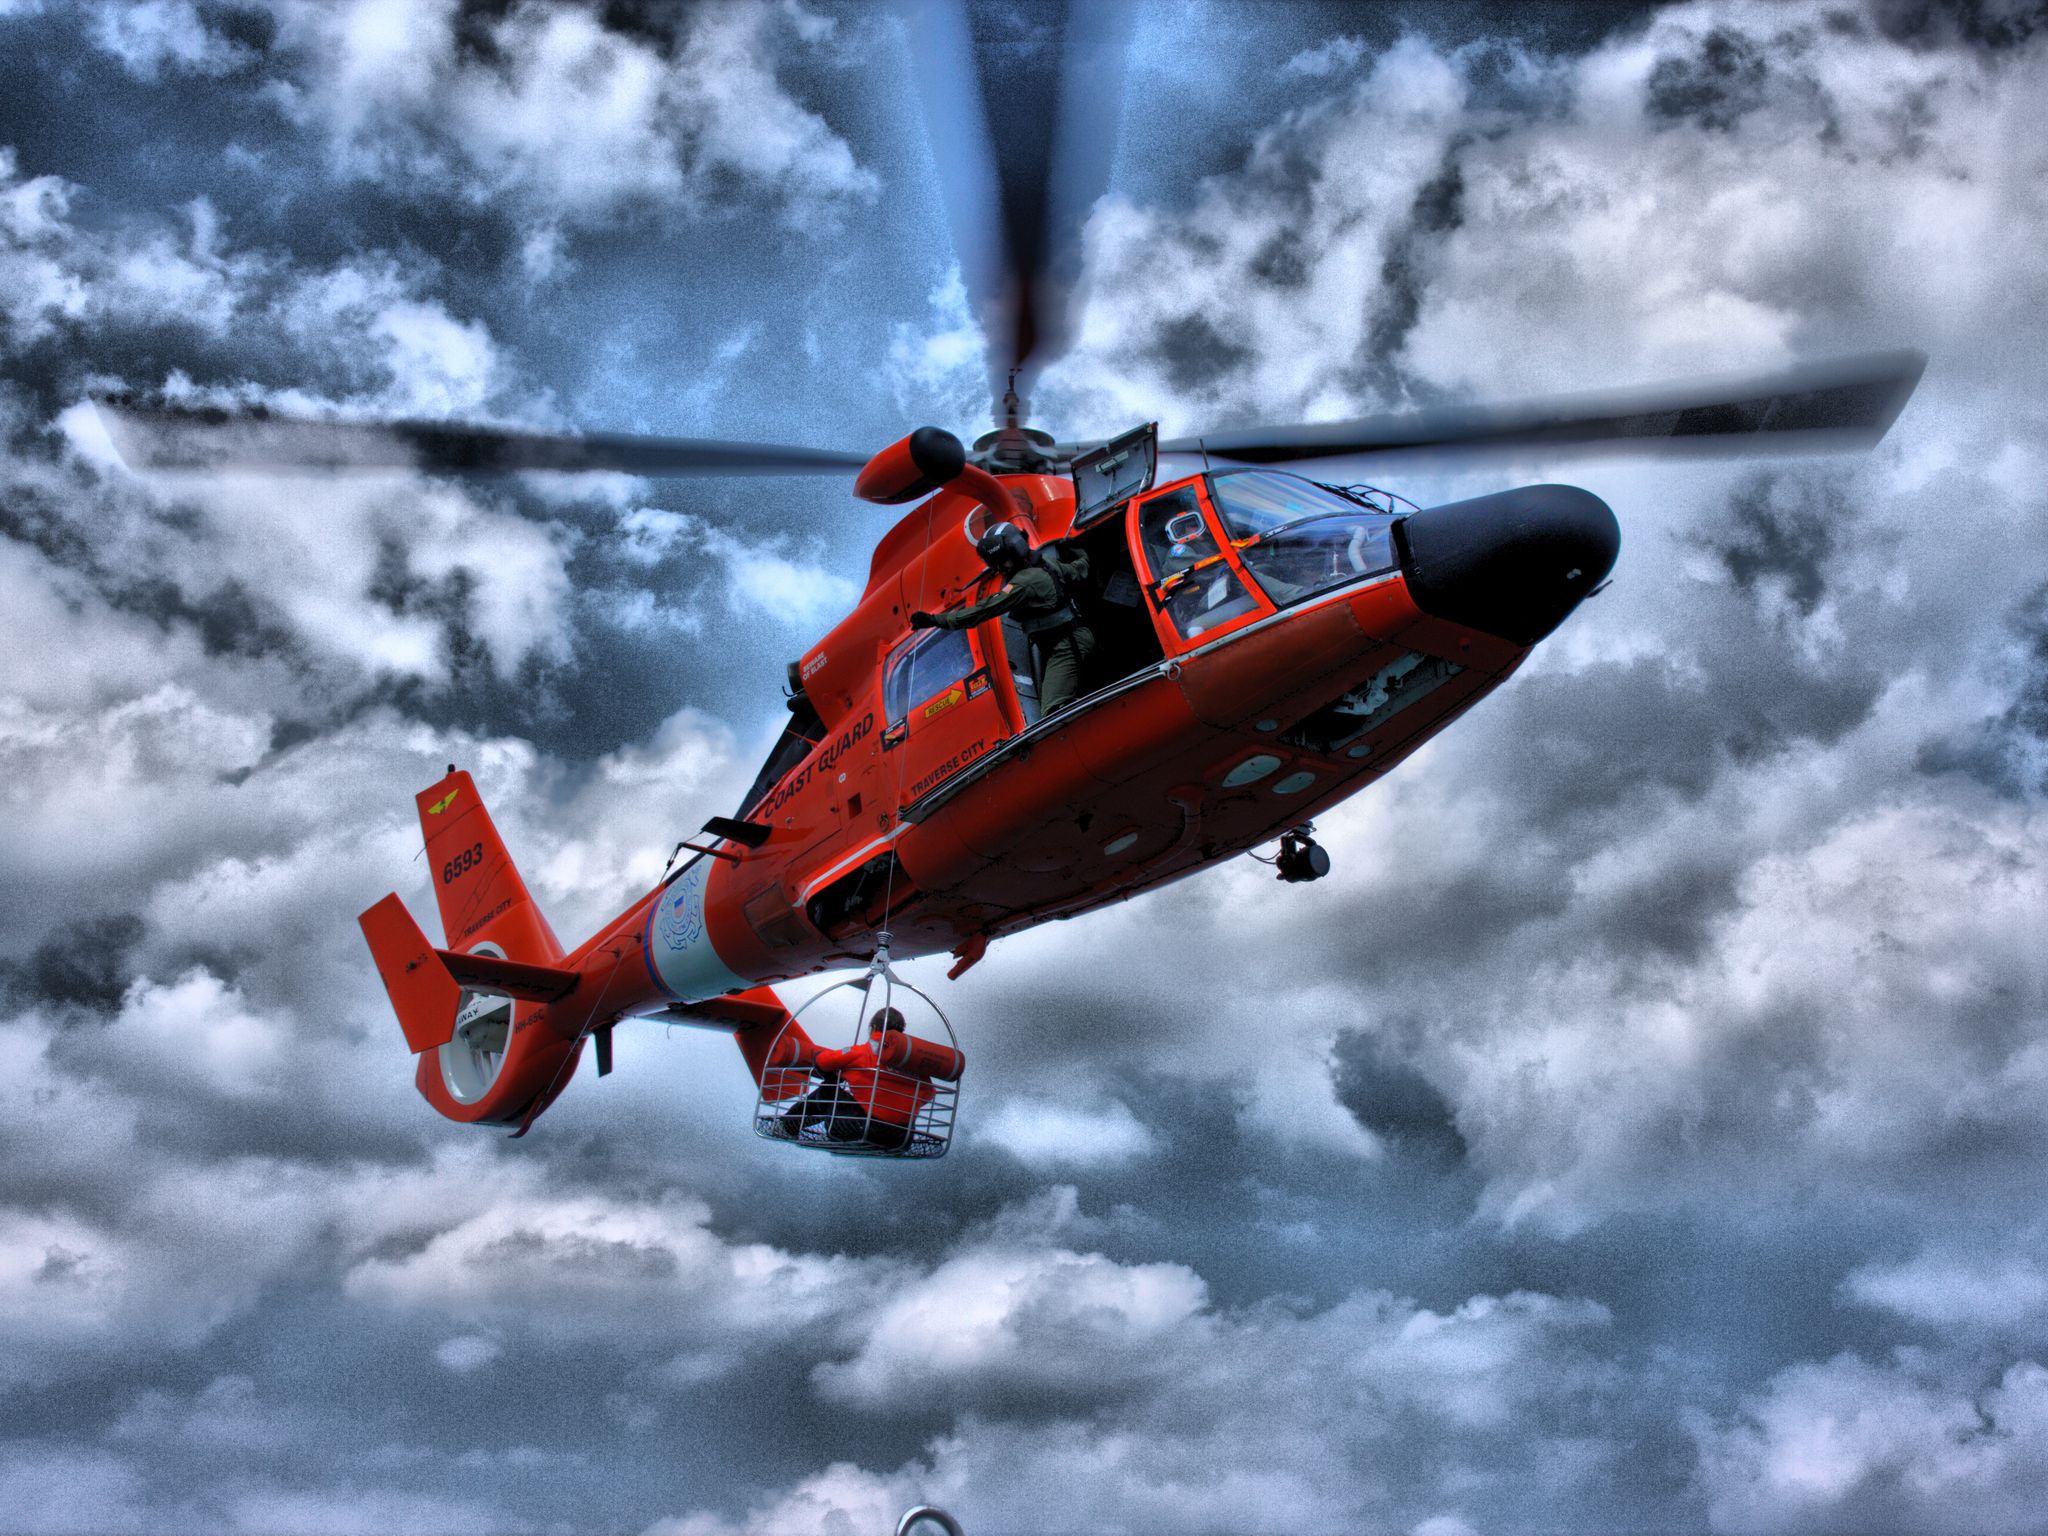 Coast Guard Helicopter Wallpaper Images amp Pictures   Becuo